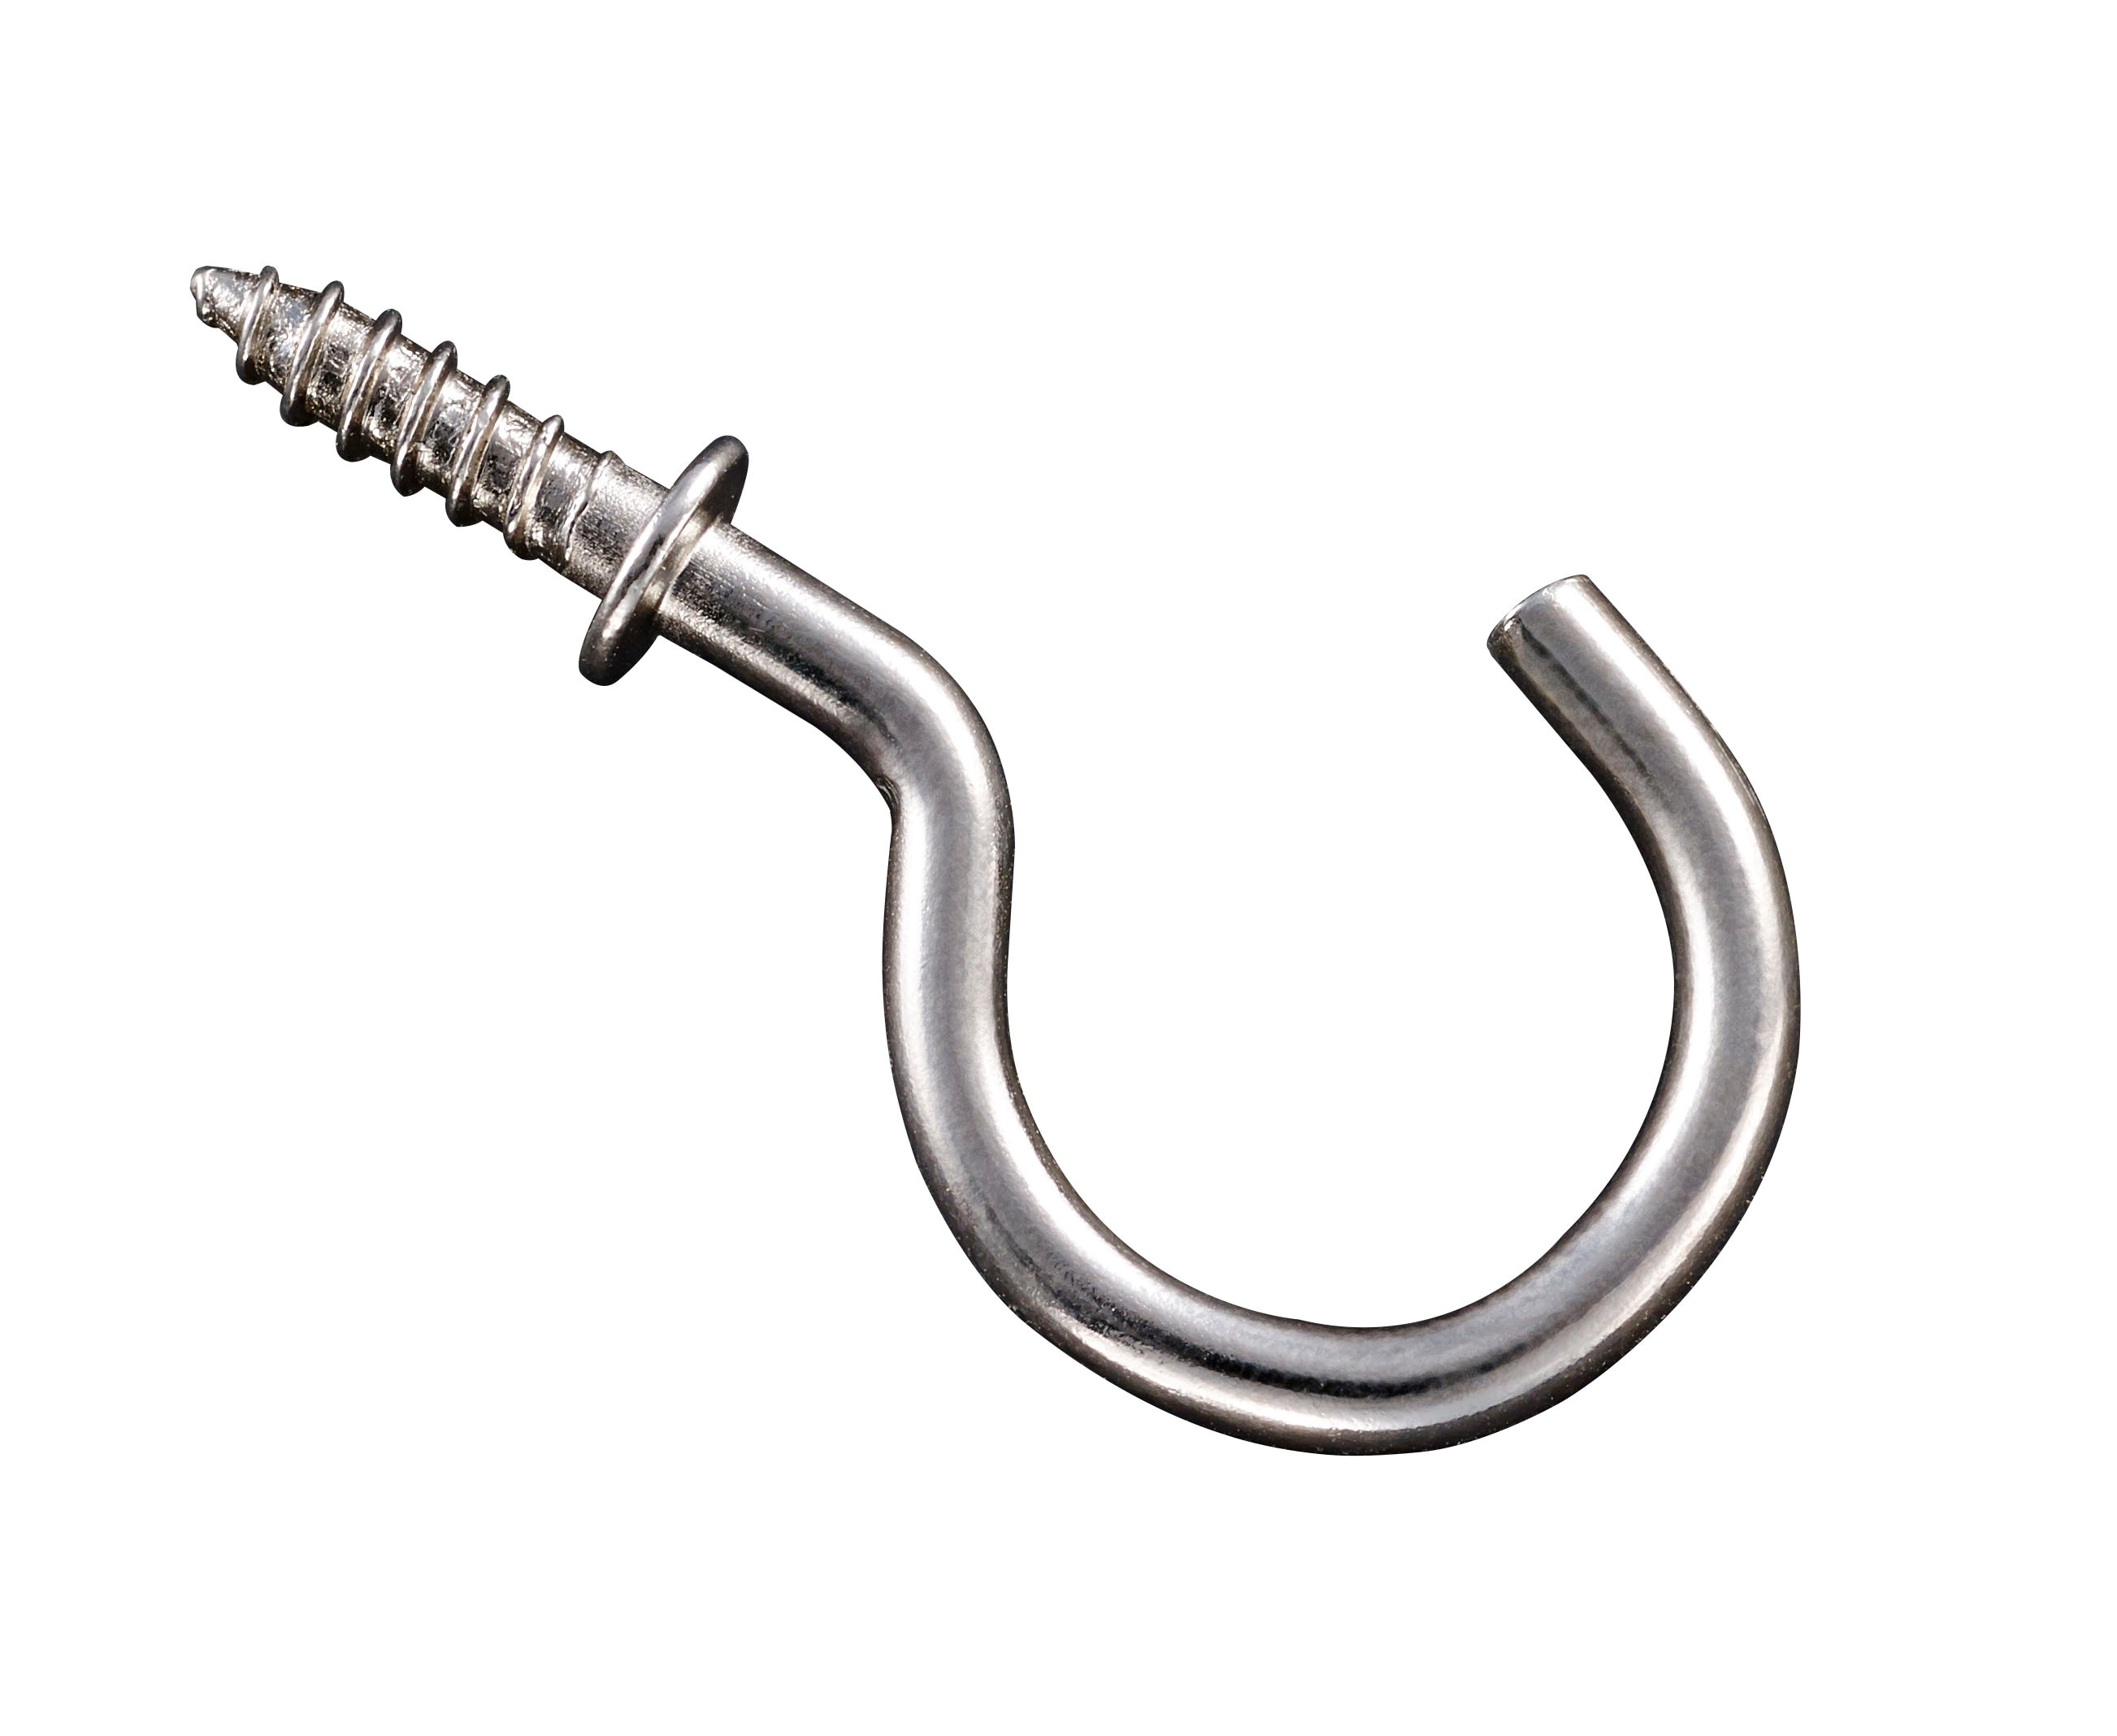 S-Hook 1 3/4 Inch (Overall Length of 5 1/2 Inch) 25 Pack - Metal Hanging  Hooks